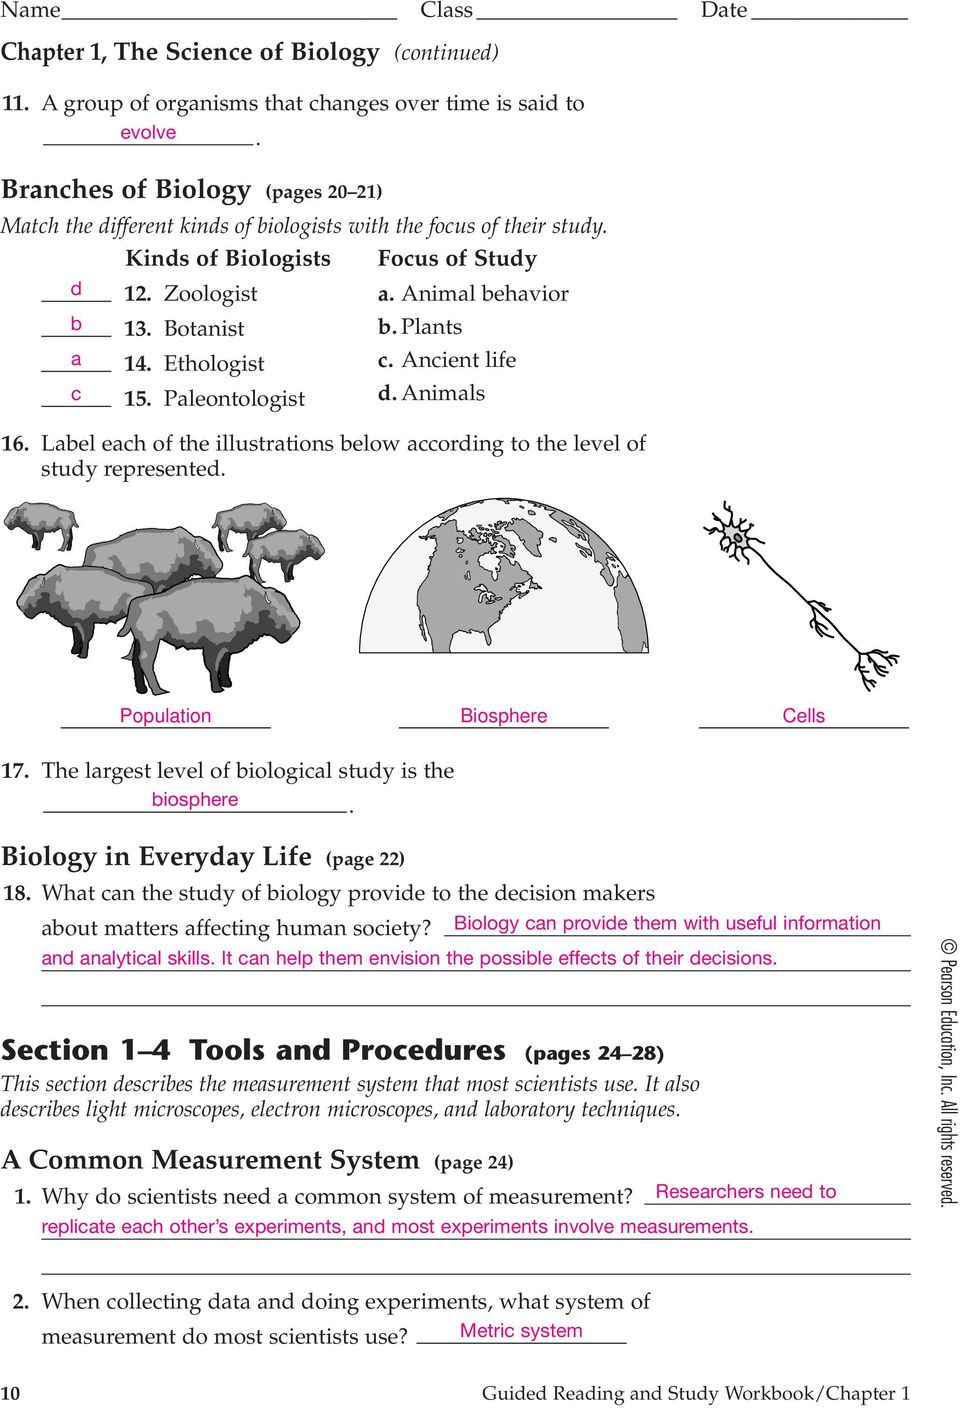 Plants a 14. Ethologist c. Ancient life c 15. Paleontologist d. Animals 16. Label each of the illustrations below according to the level of study represented. Population Biosphere Cells 17.